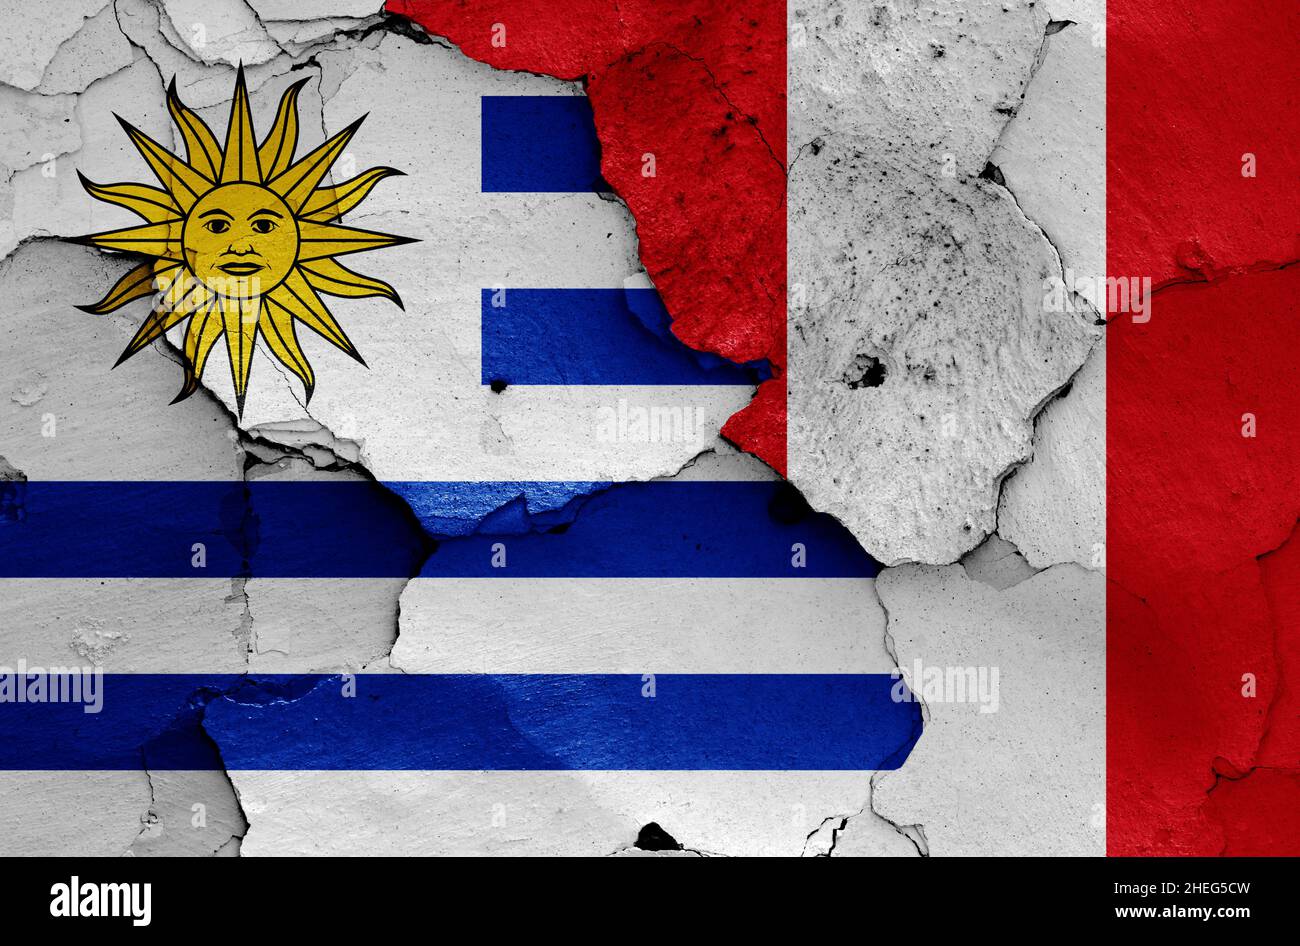 flags of Uruguay and Peru painted on cracked wall Stock Photo